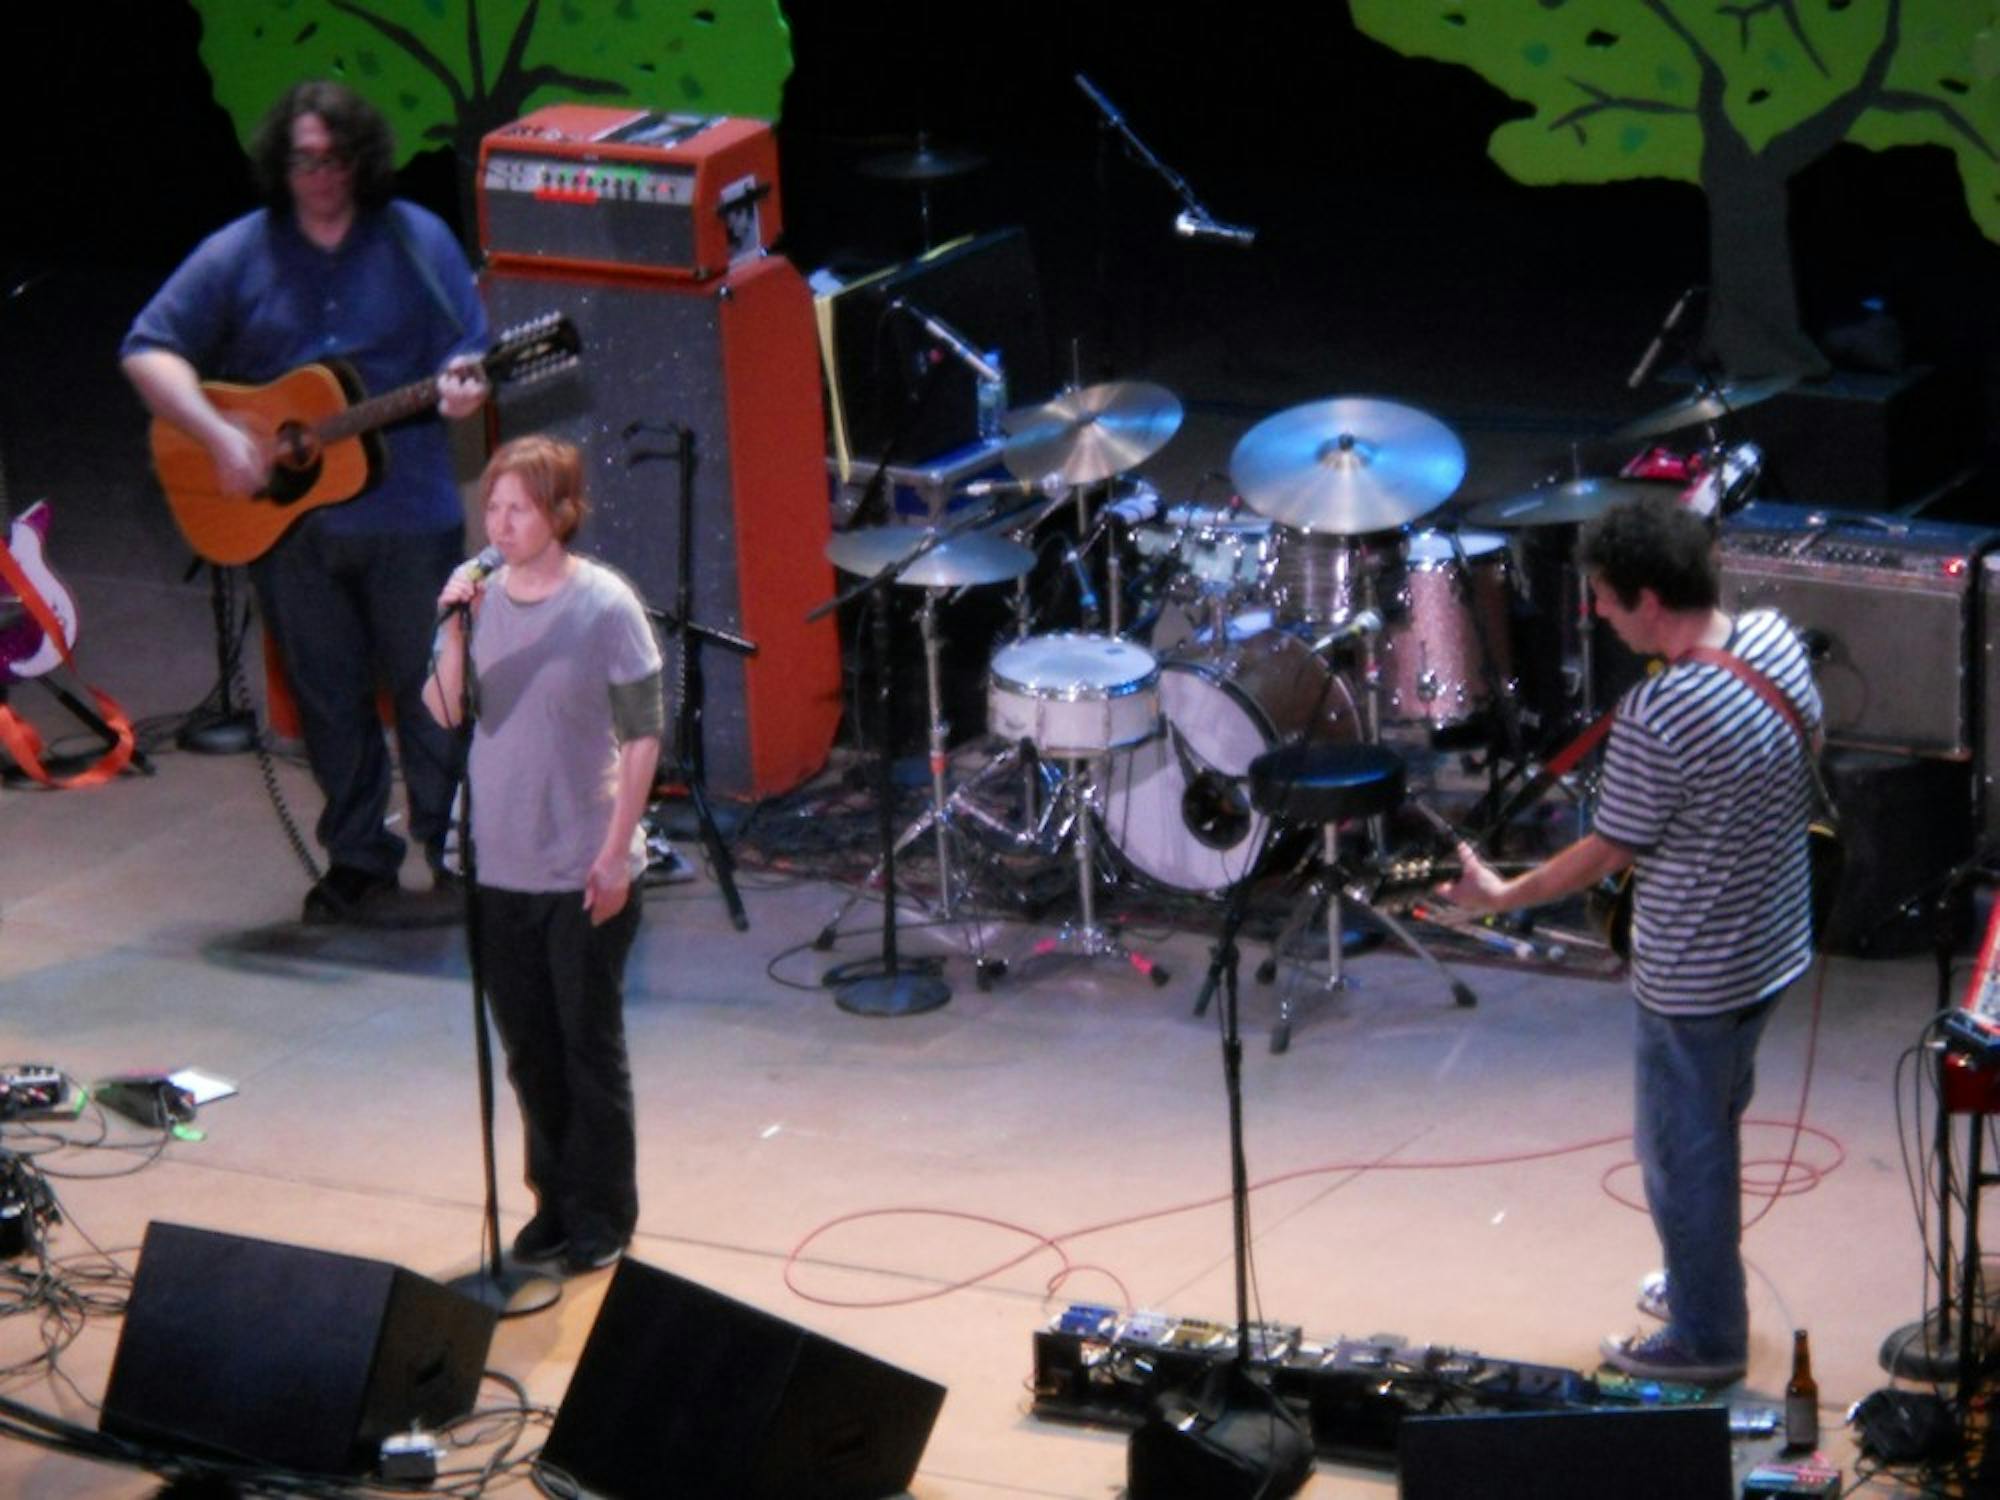 	Yo La Tengo performed at the Michigan Theater Feb. 8. The show lived up to high expectations and the crowd enjoyed it.